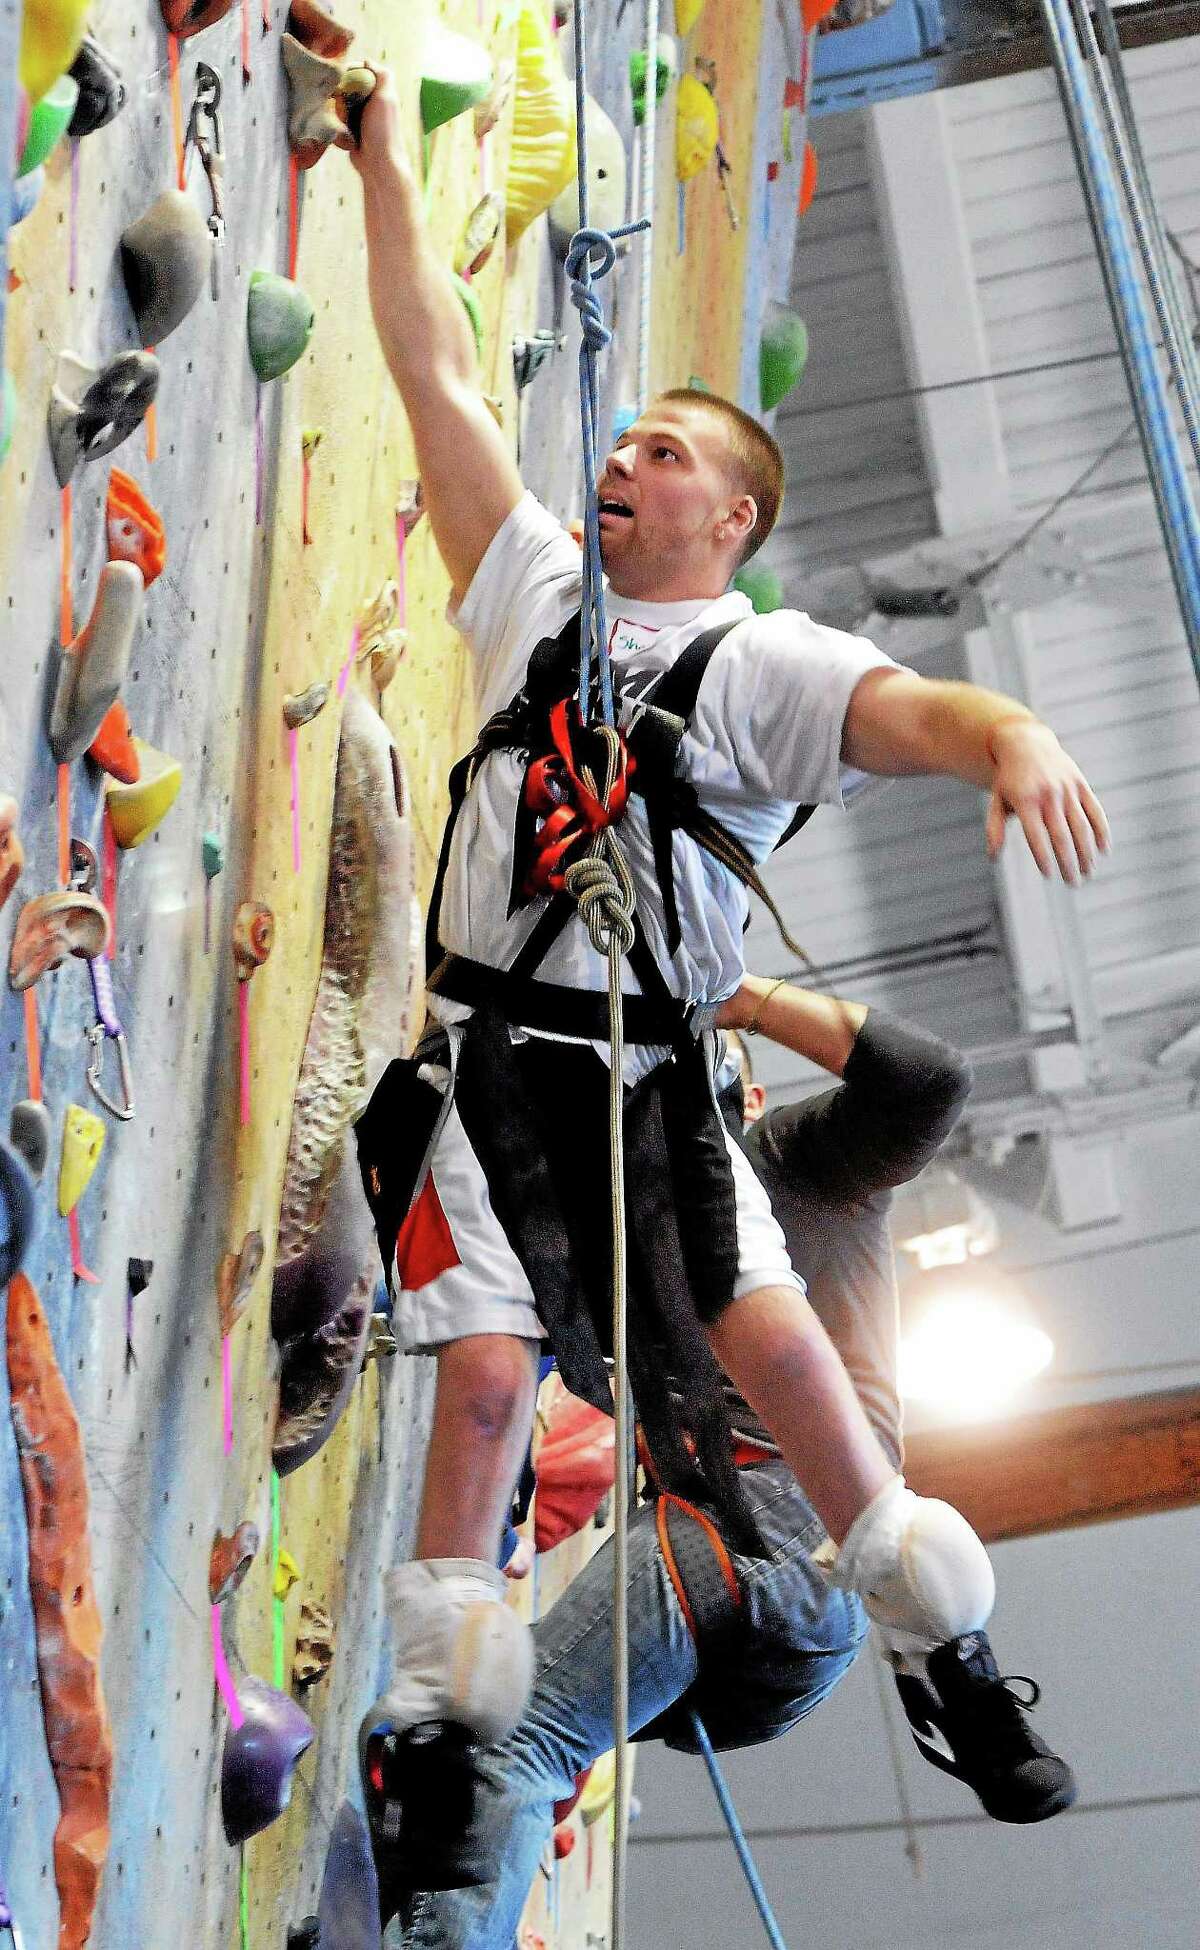 (Mara Lavitt ó New Haven Register) April 19, 2014 Wallingford The Gaylord Specialty Healthcare Sports Association, with the help of Nate McKenzie of Ascent Climbing and Paradox Sports, hosted an adaptive rock climbing clinic for those with physical disabilities or visual impairment, at Prime Climb in Wallingford. Shane Mosko of Southington during his climb. mlavitt@newhavenregister.com